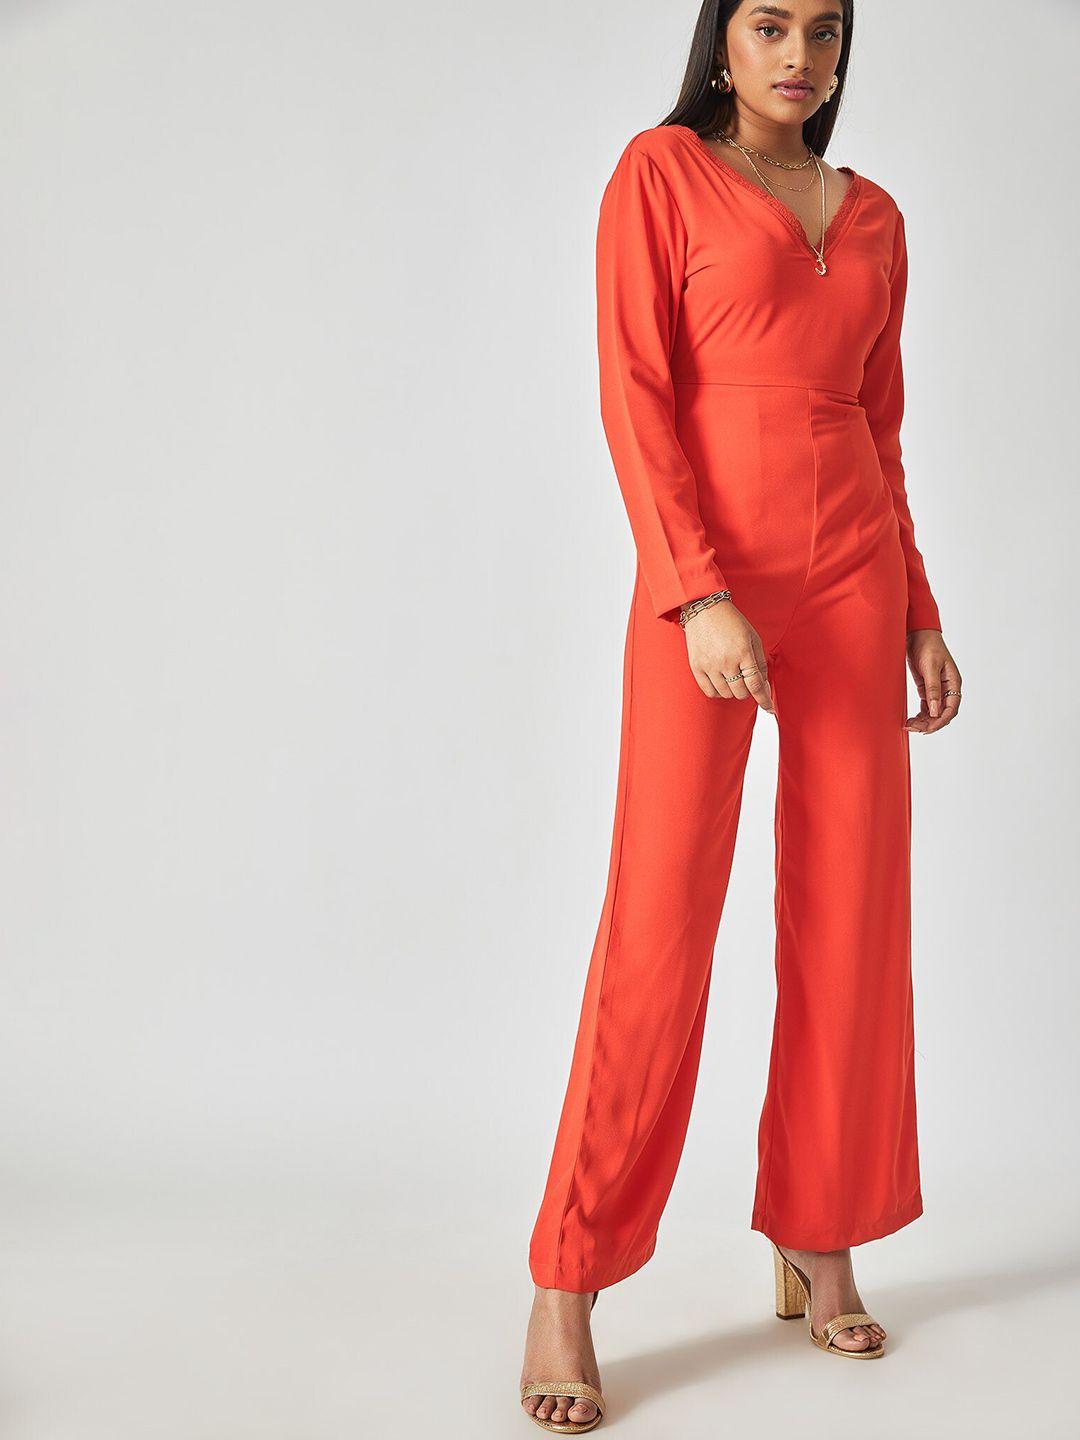 the-label-life-red-back-tie-up-basic-jumpsuit-with-lace-inserts